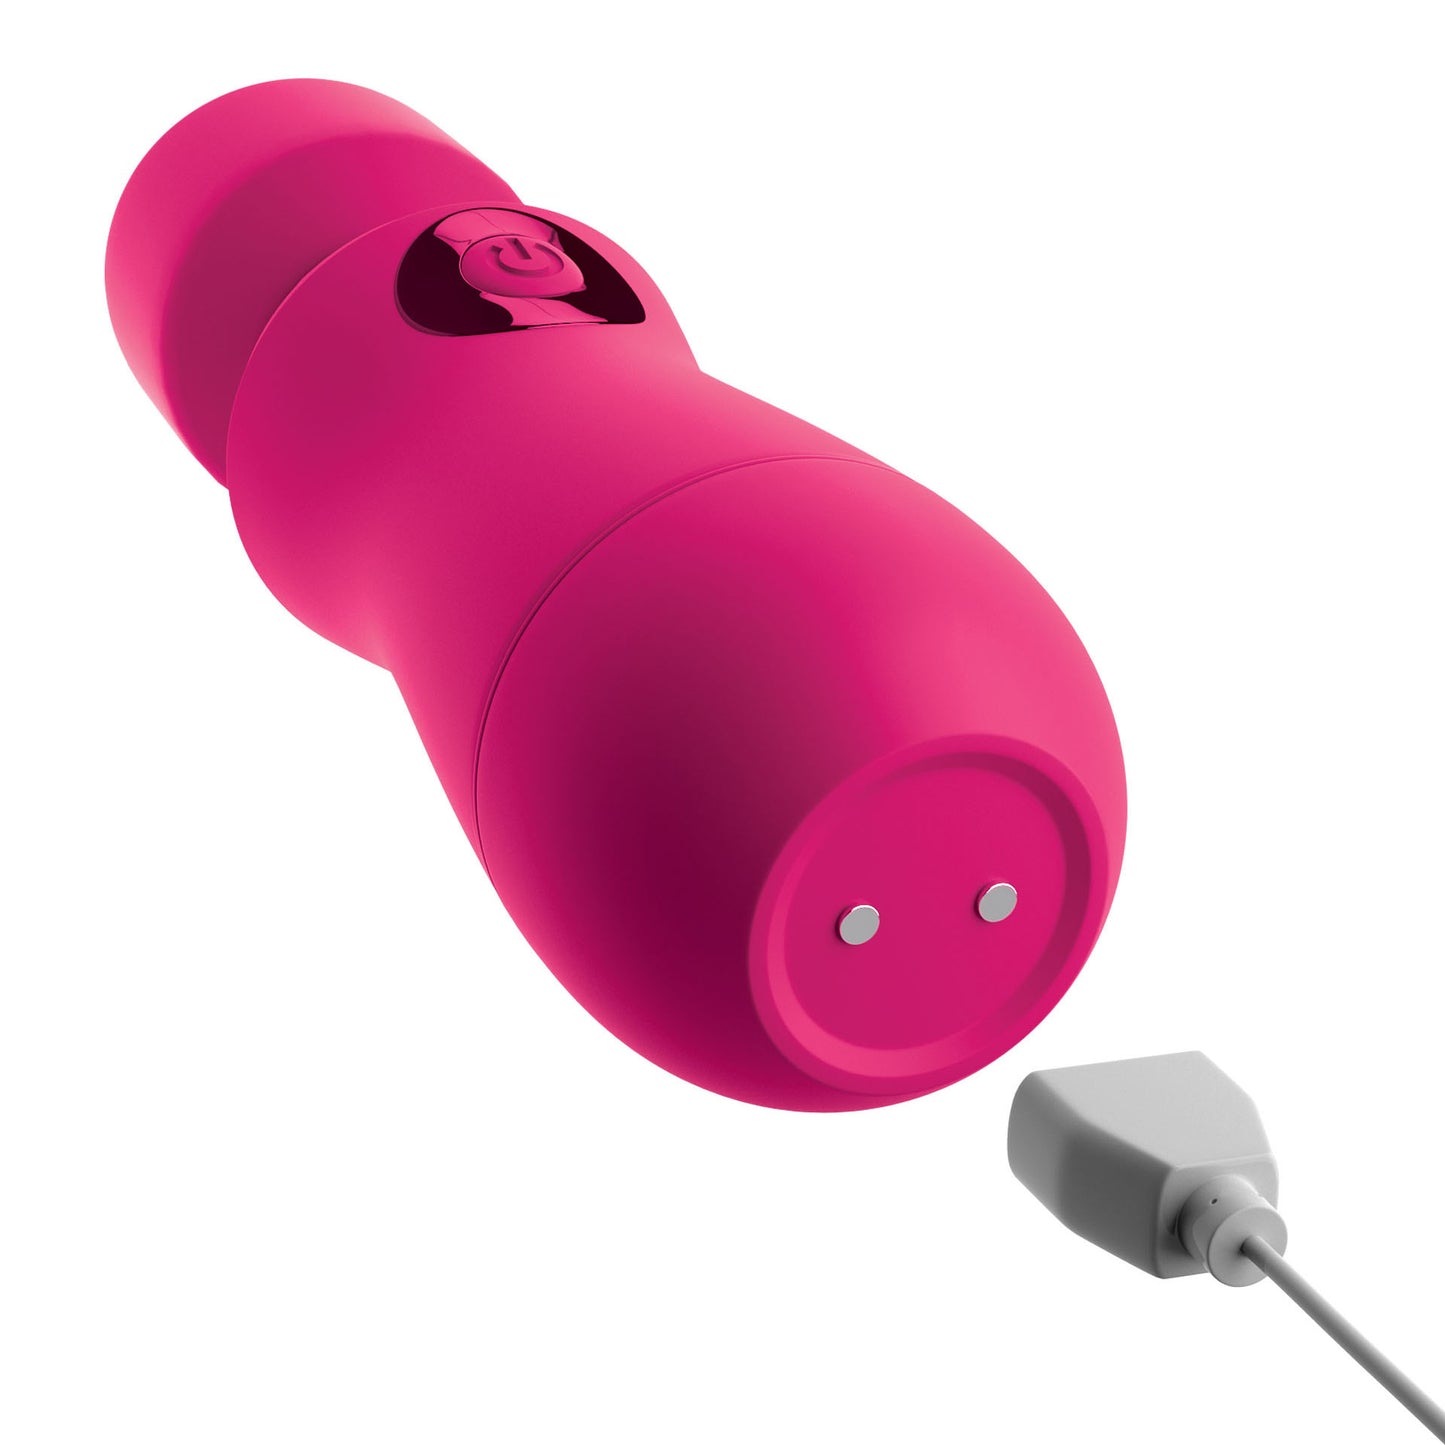 OMG Silicone Rechargeable Wand Pink - UABDSM